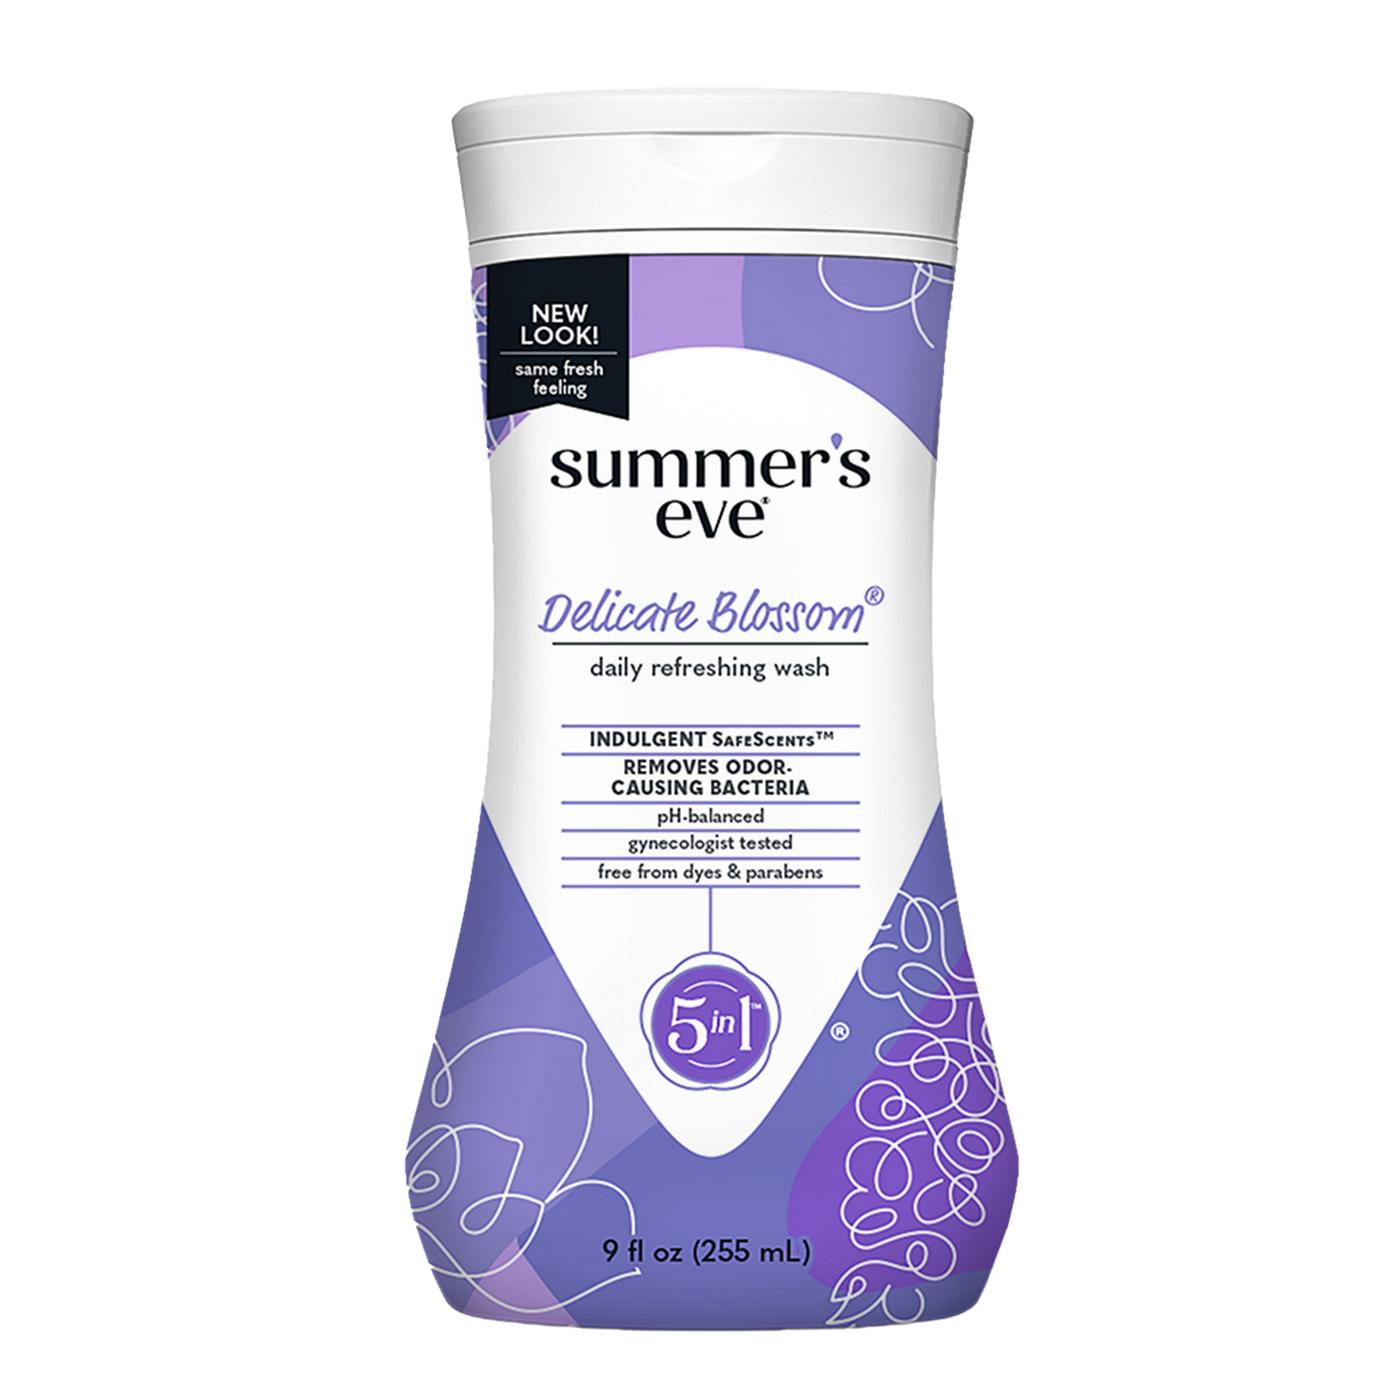 Summer's Eve Cleansing Wash - Delicate Blossom; image 1 of 3